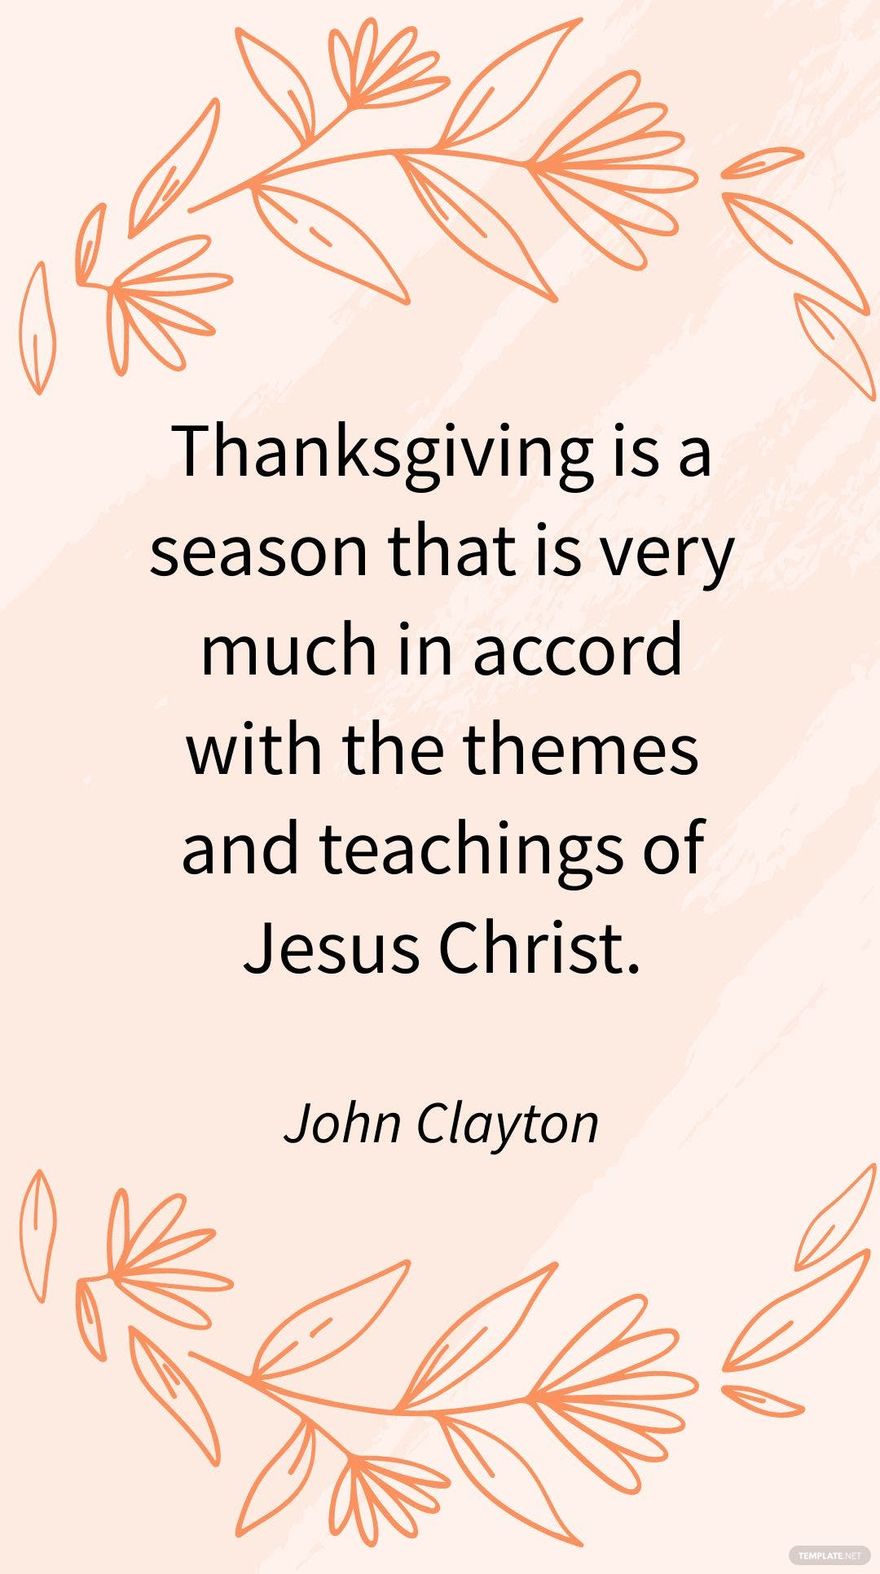 Free John Clayton - Thanksgiving is a season that is very much in accord with the themes and teachings of Jesus Christ.